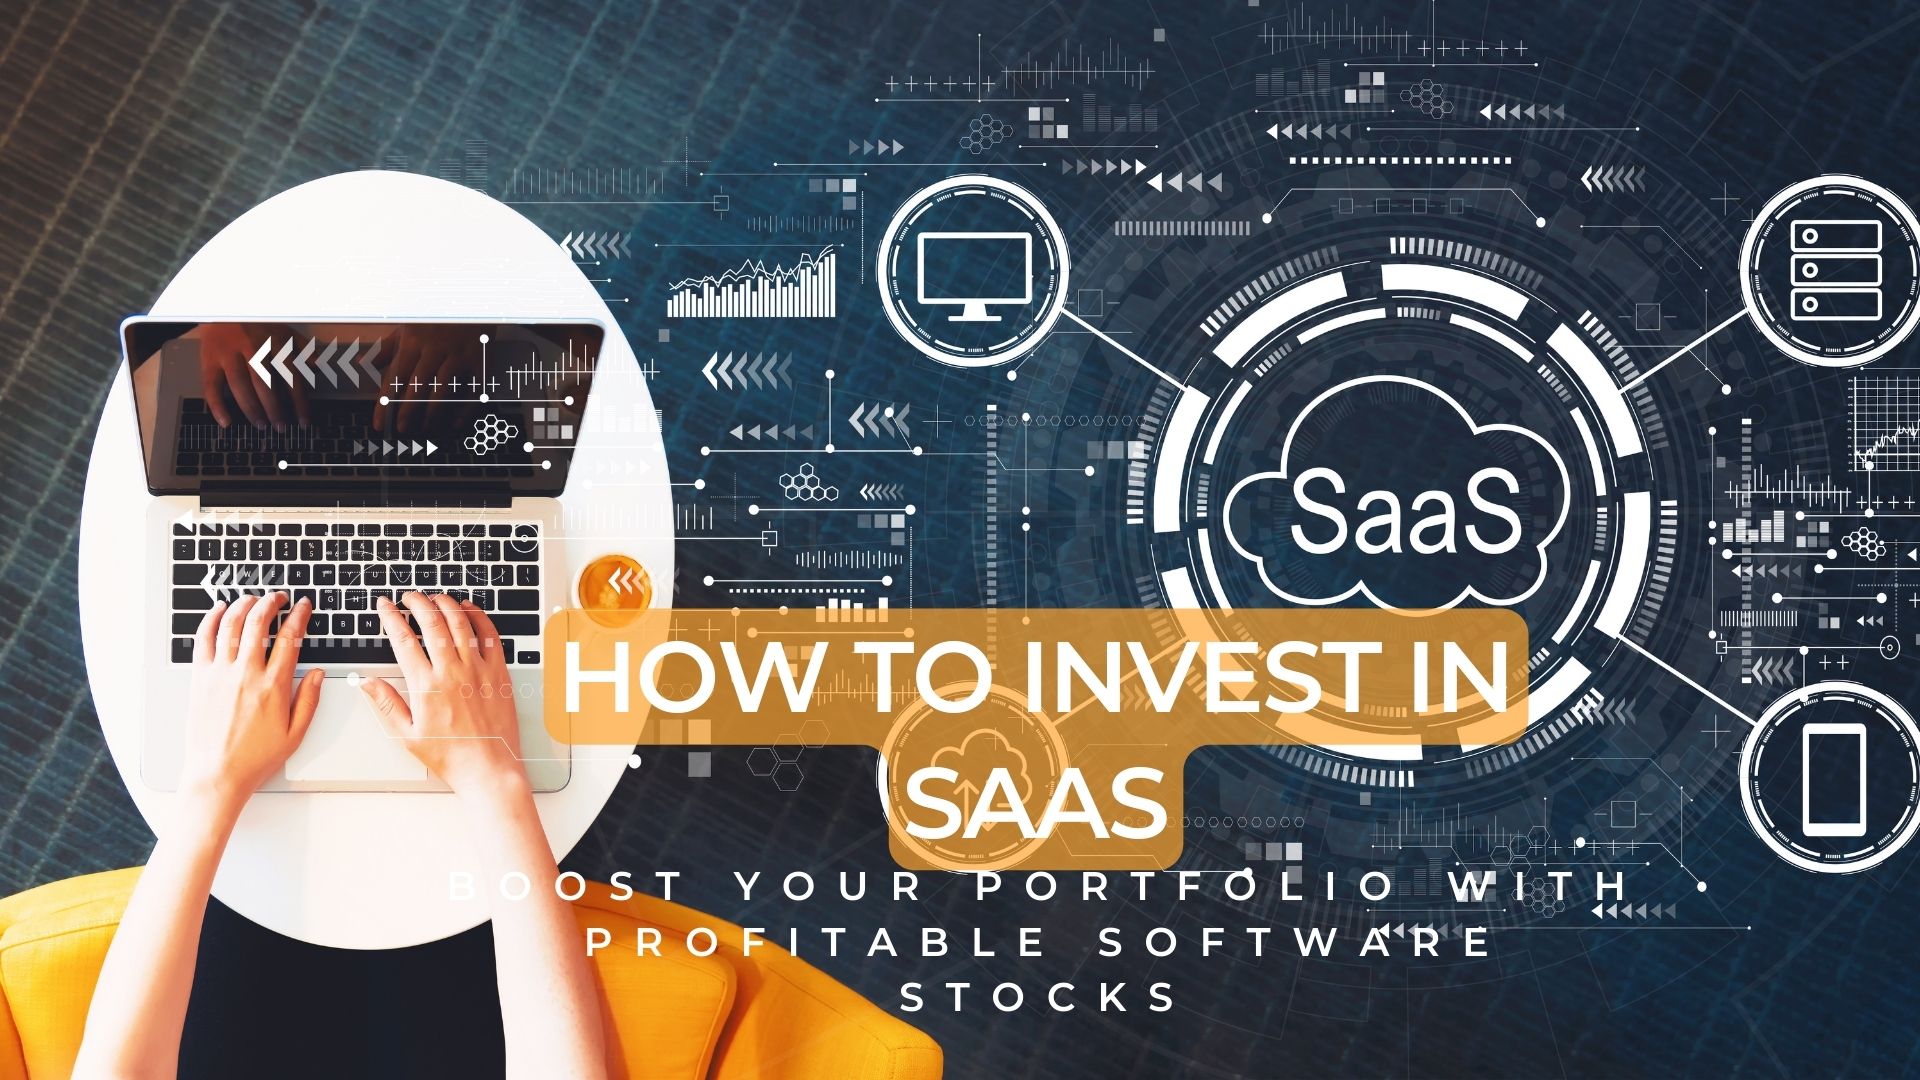 How to Invest in Saas